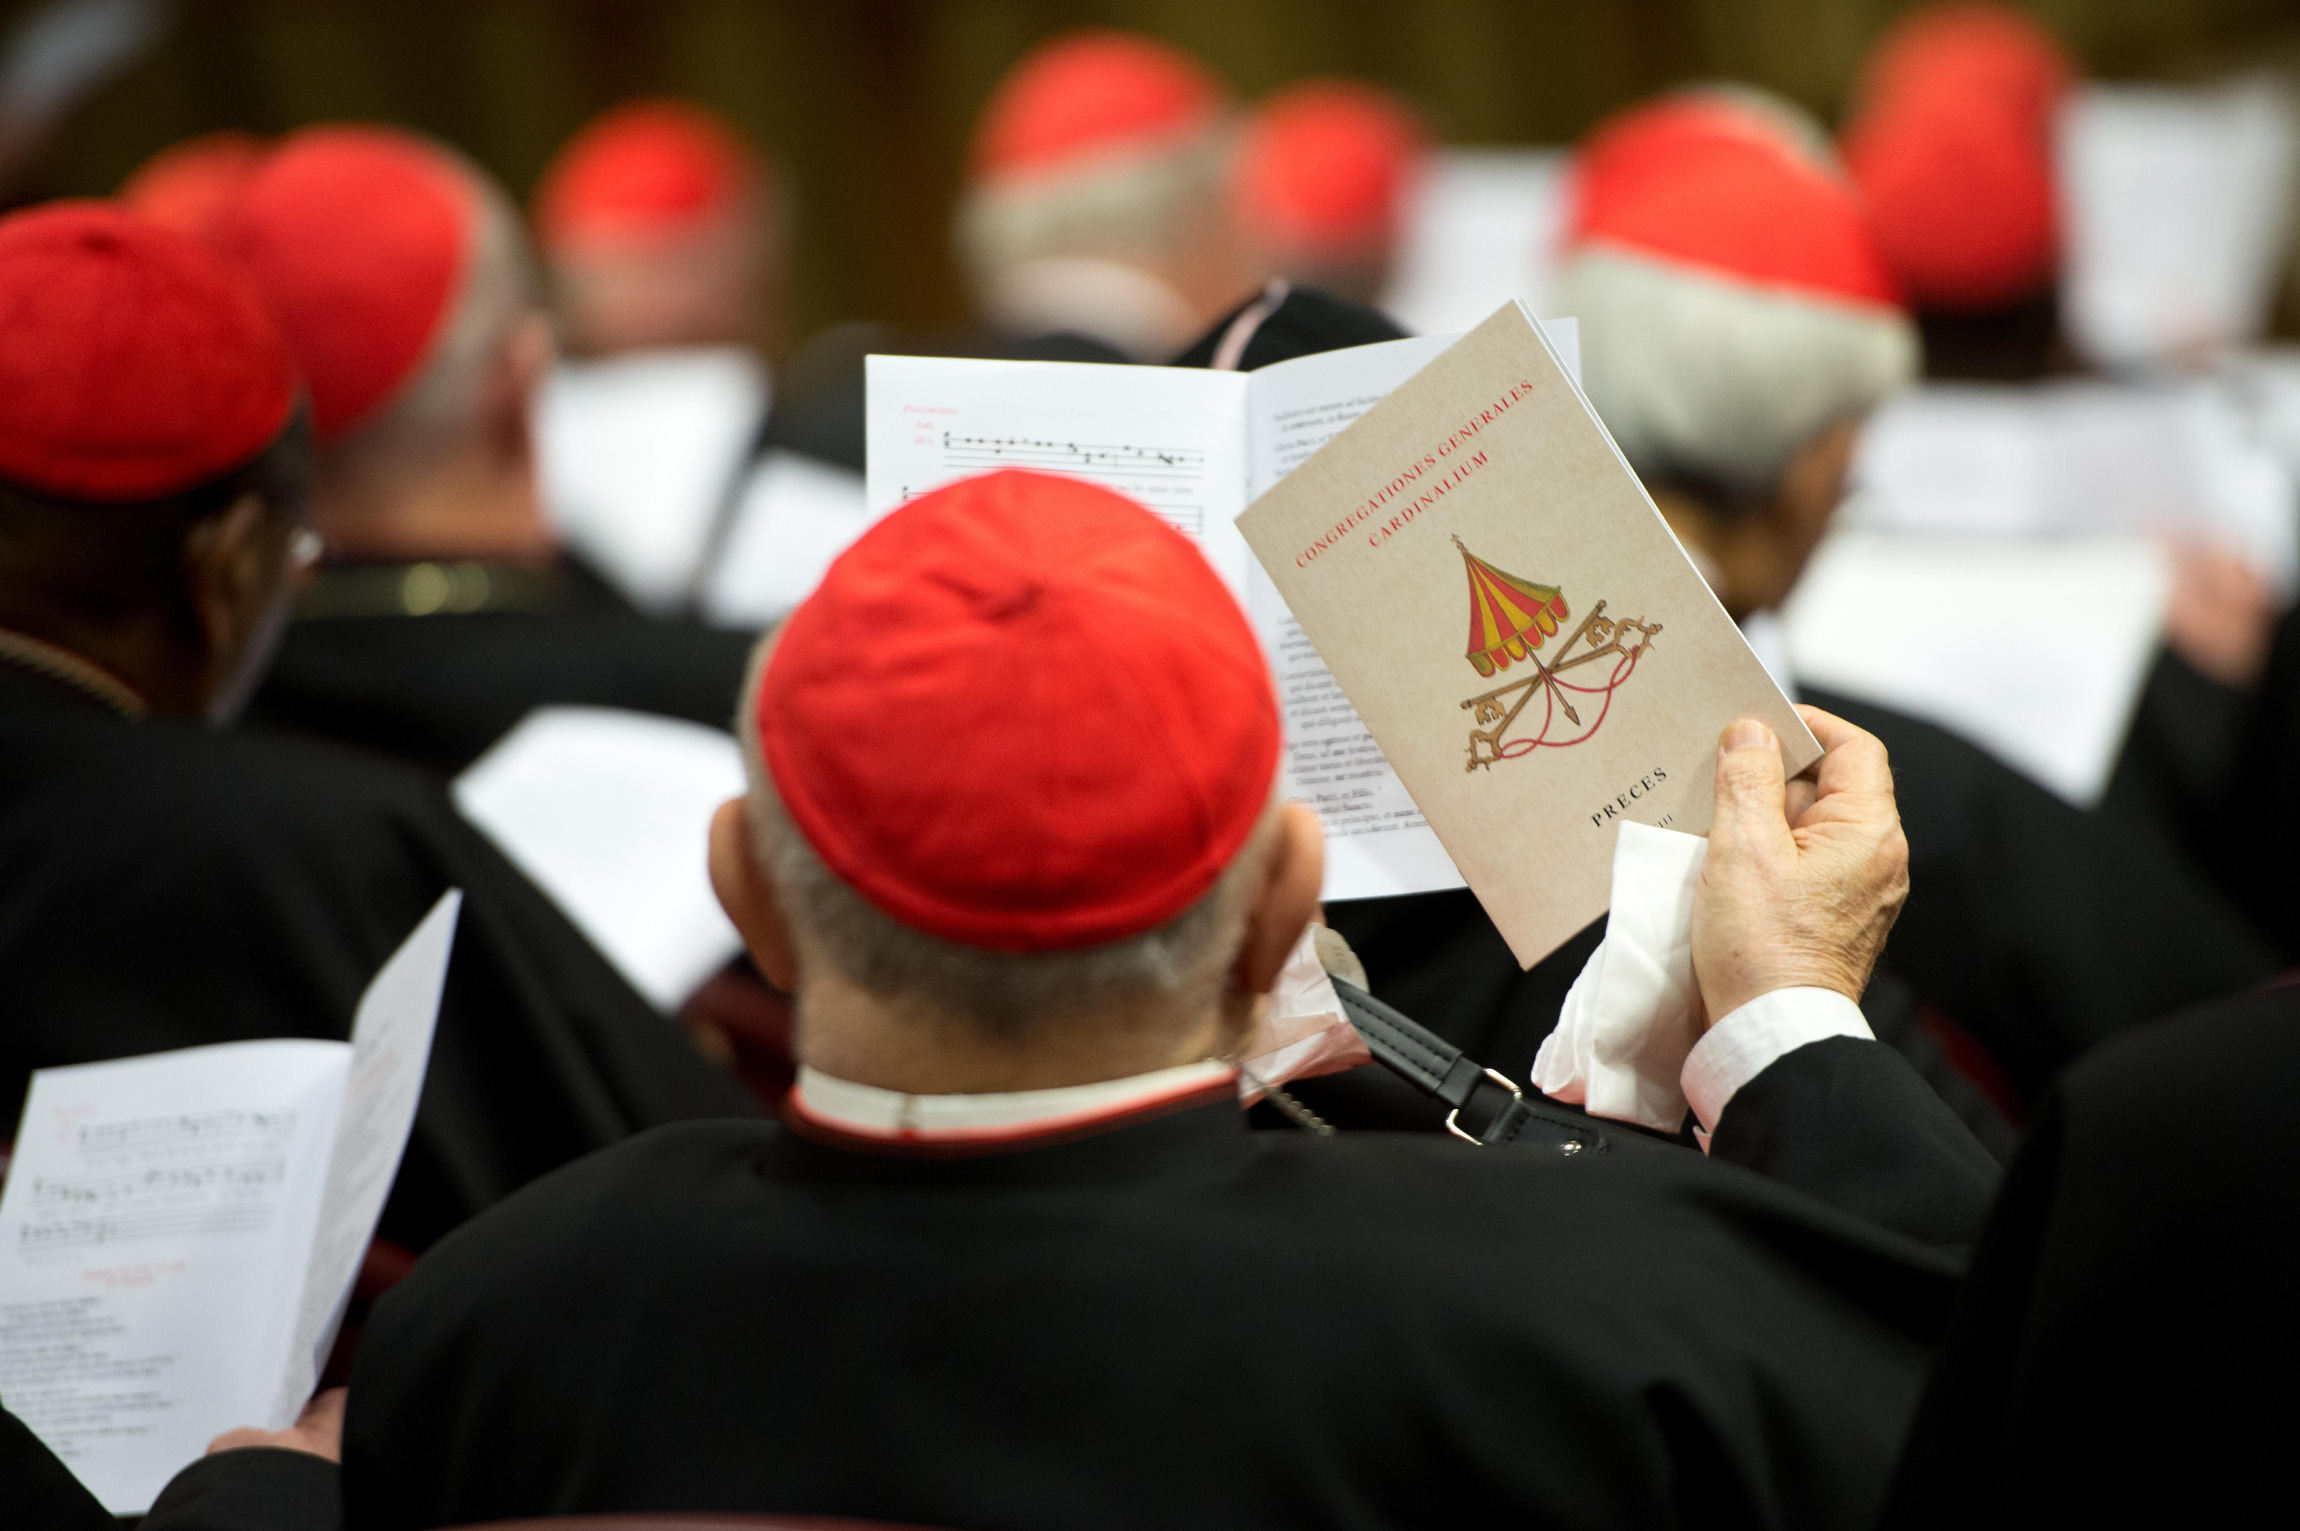 A prelate holds up a booklet emblazoned with the "sede vacante" seal as cardinals gather in synod hall at the Vatican March 7 for one of several general congregation meetings ahead of the conclave. (CNS photo/L'Osservatore Romano)